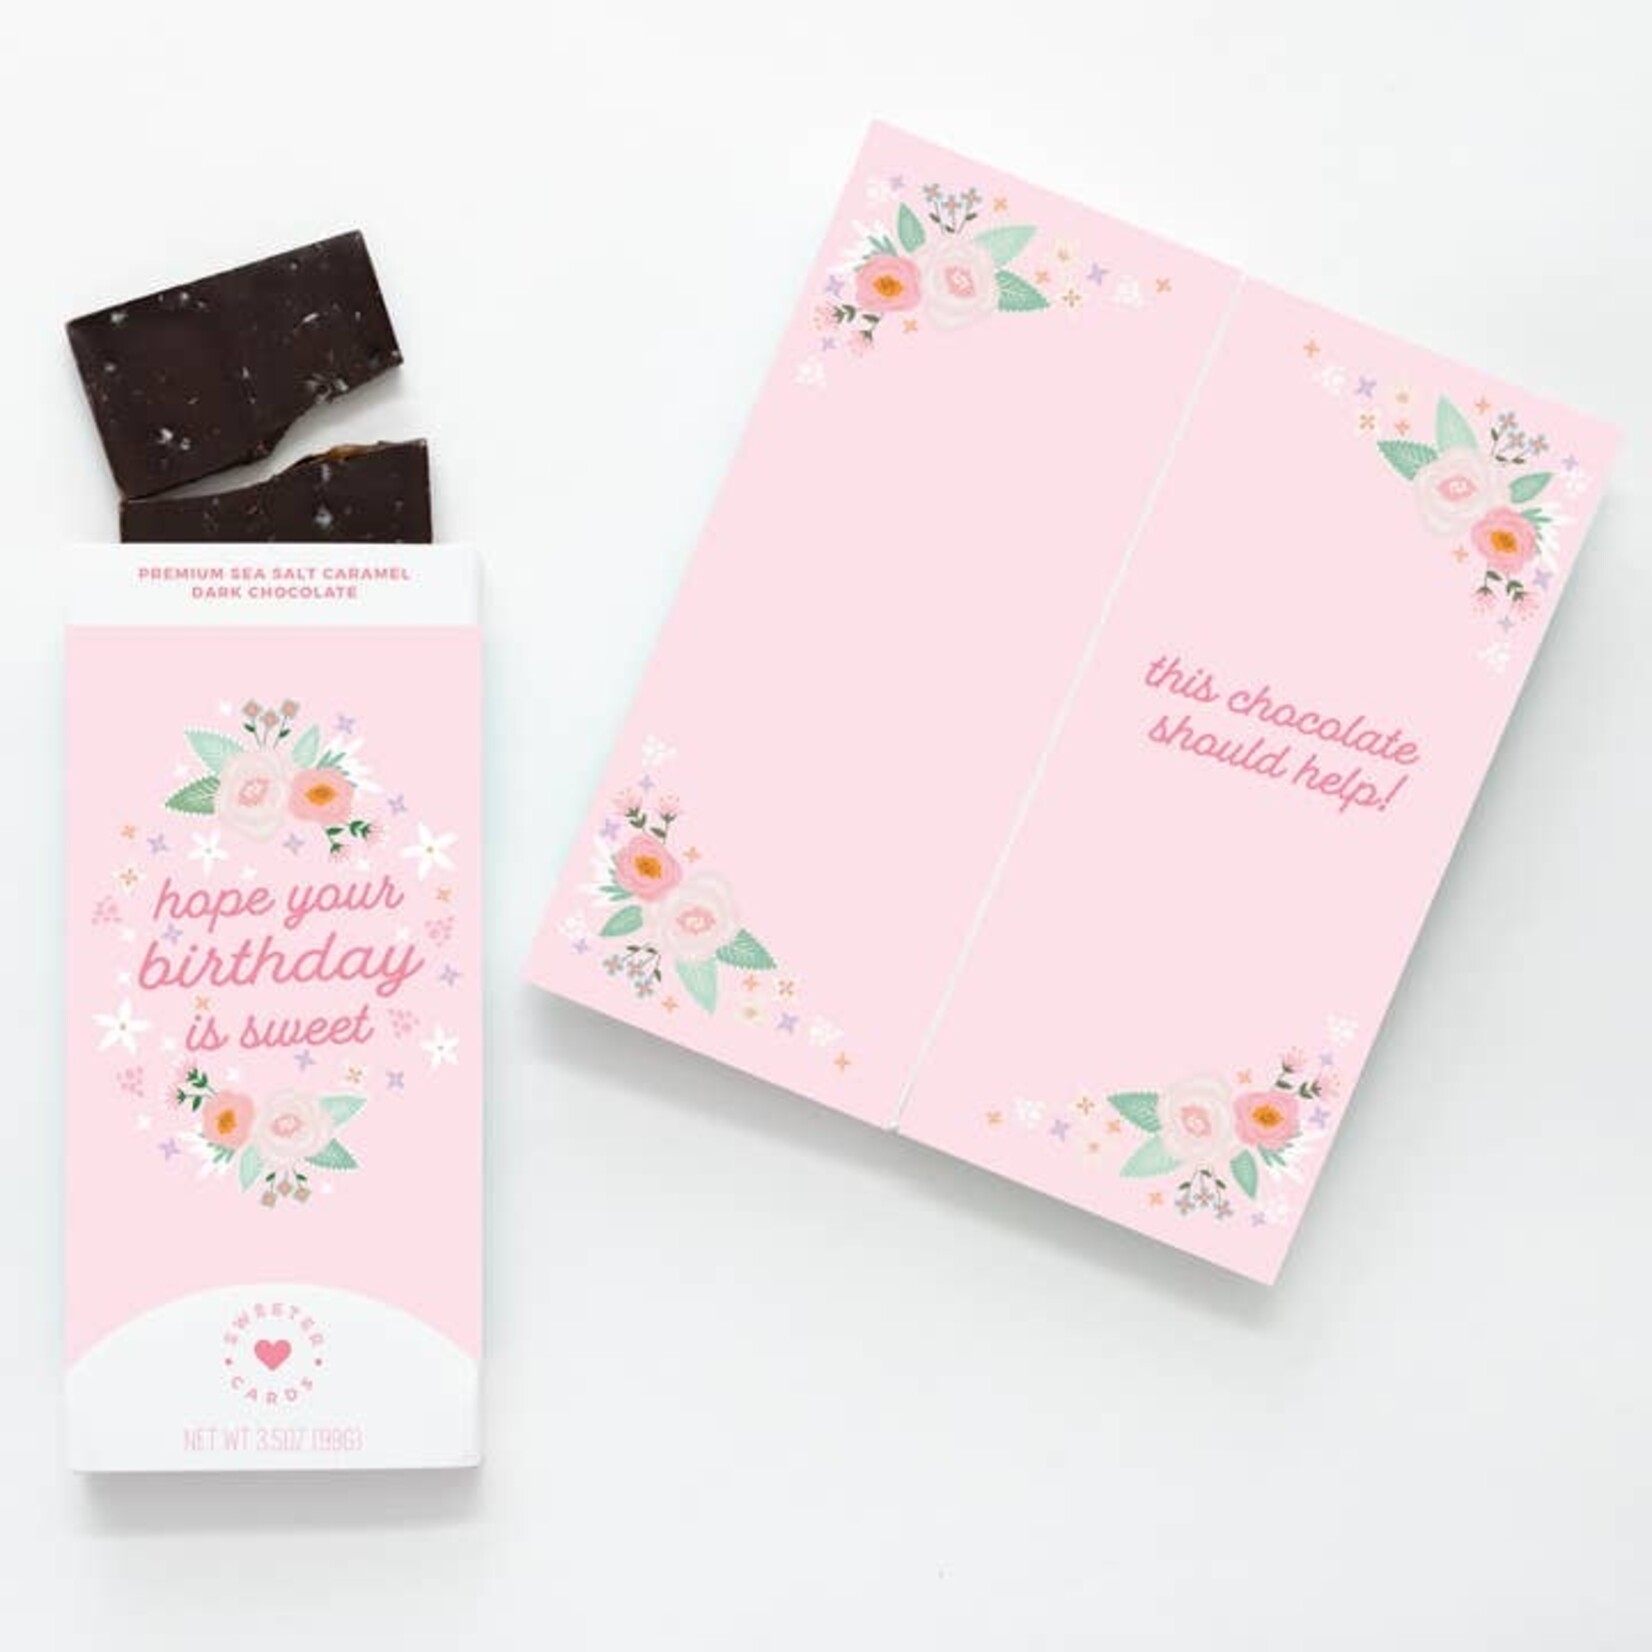 Hope Your Birthday Is Sweet–Chocolate Bar and Greeting Card!